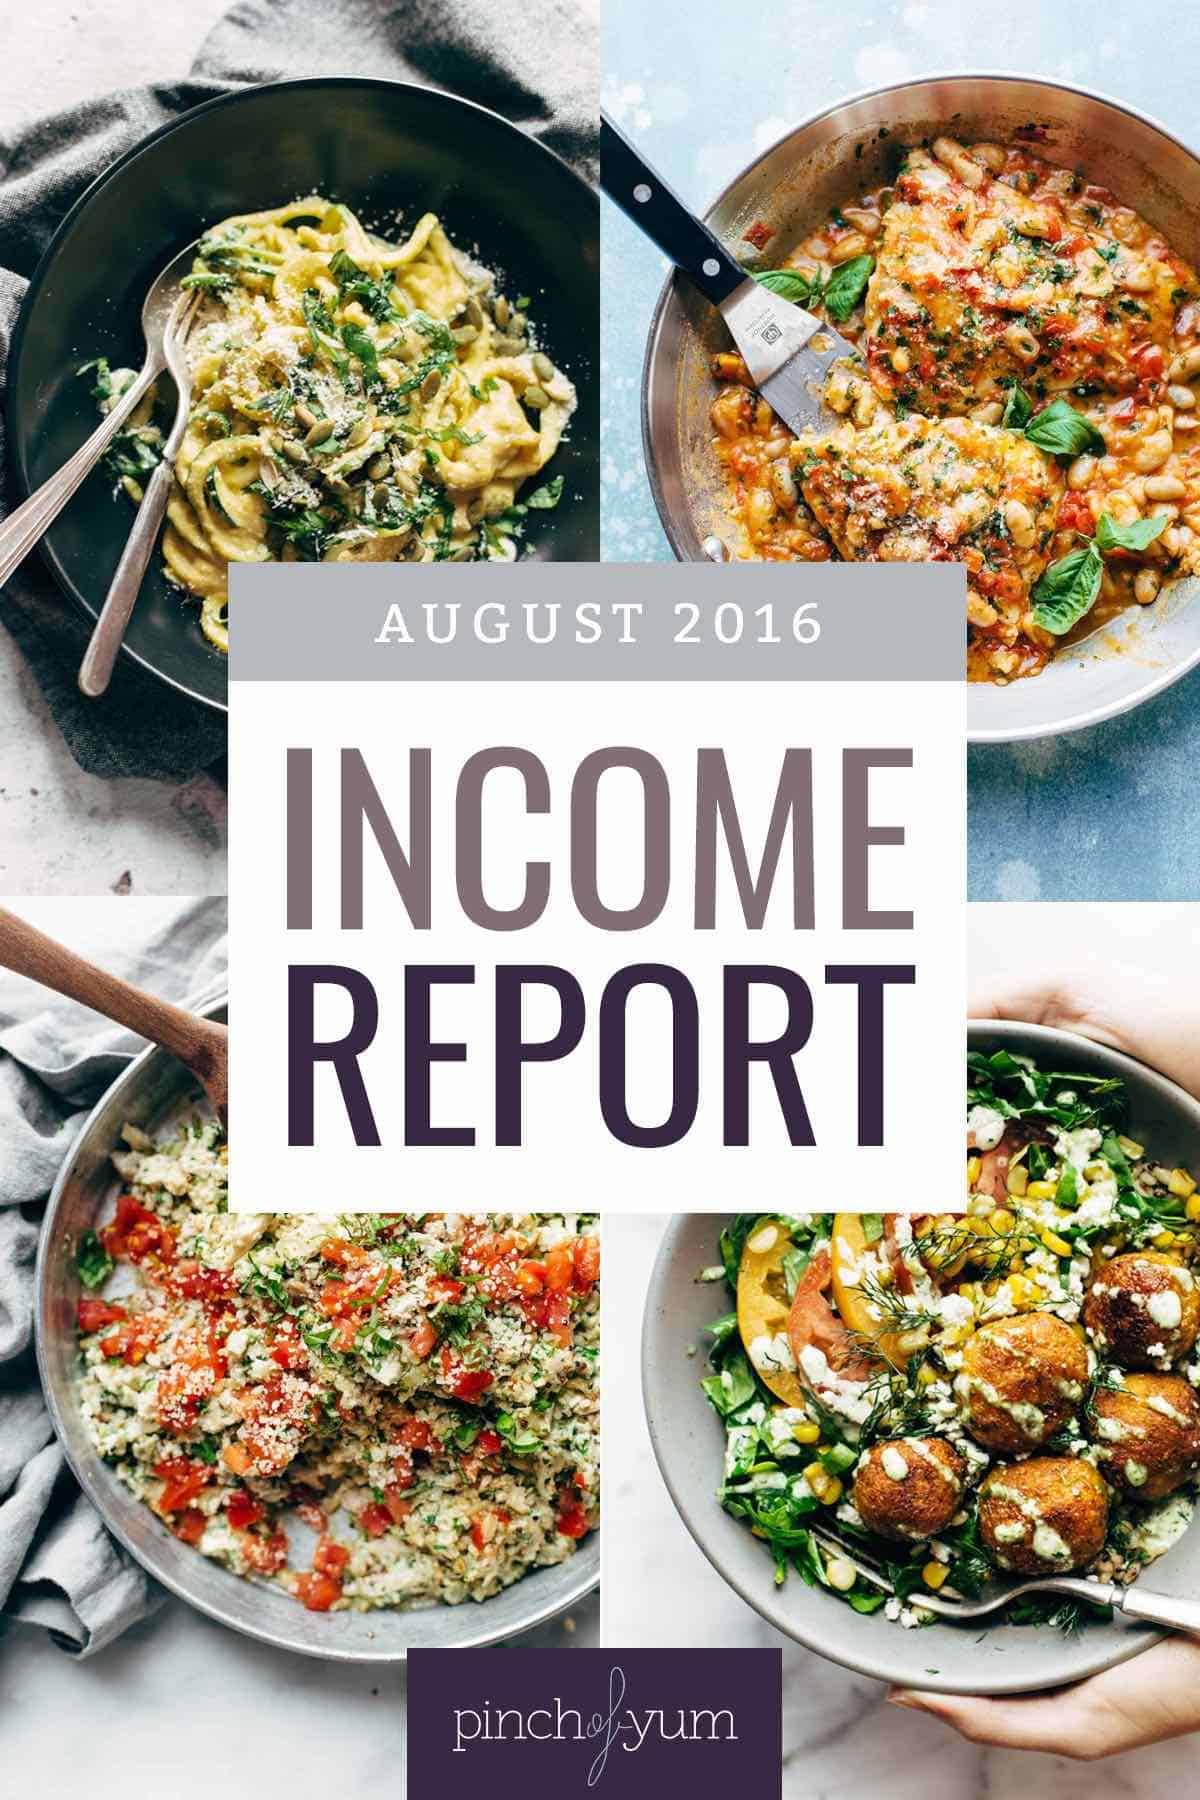 August Income Report collage images.